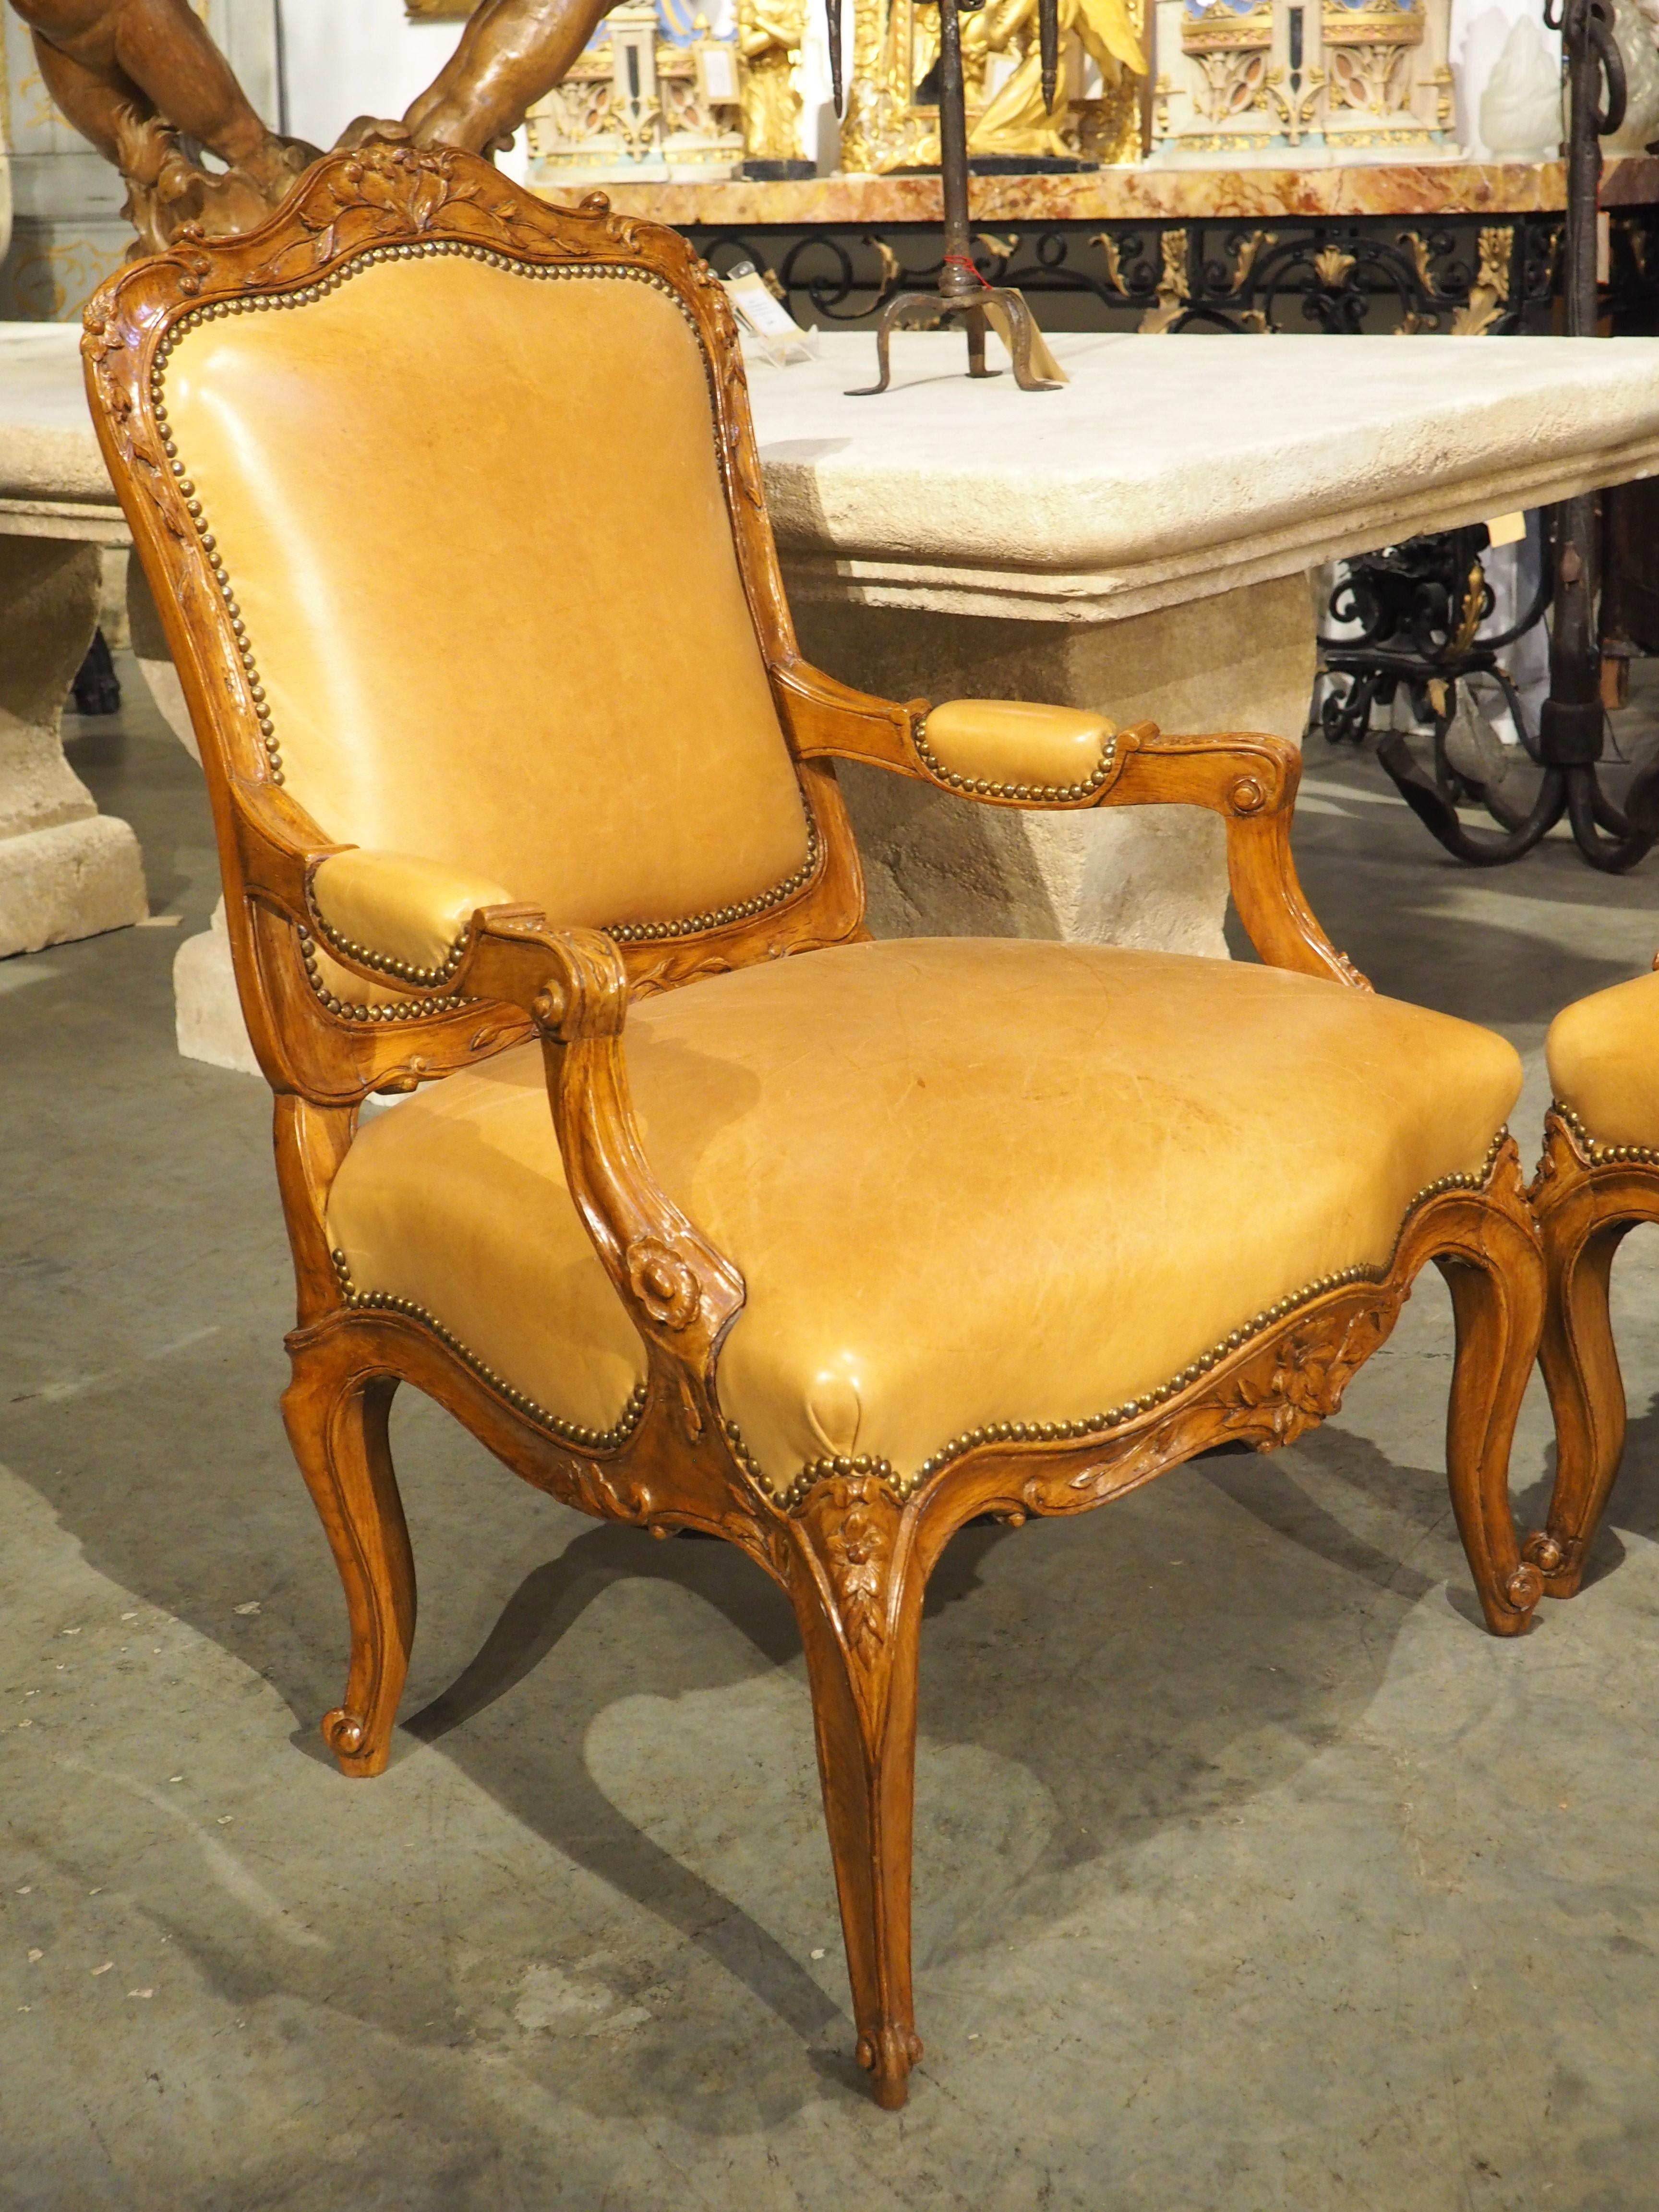 Hand-carved circa 1900 in the Regence style, this beautiful pair of armchairs have caramel-colored leather upholstery, forming a visually stunning palette with the rich brown patina of the varnished wood frames. Each chair back, manchette, and